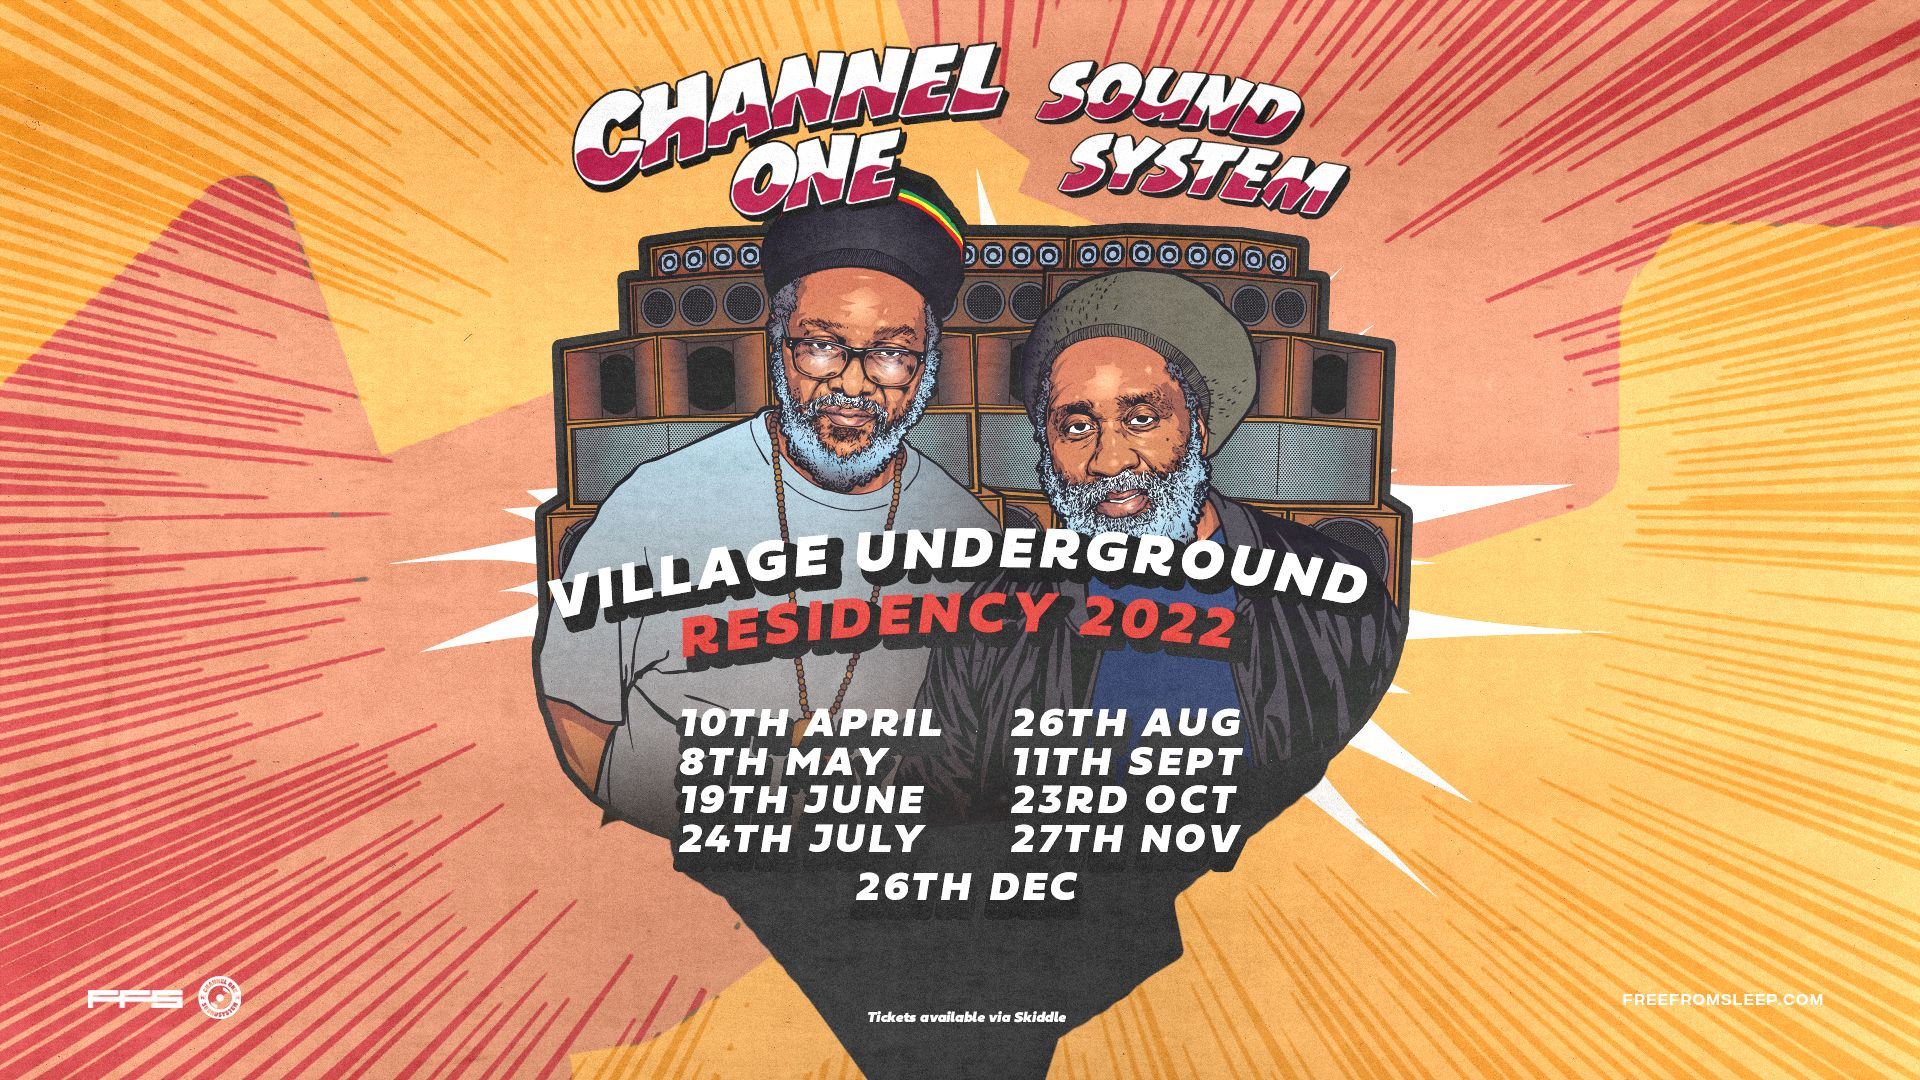 Channel One Sound System - Sunday Session - Flyer front